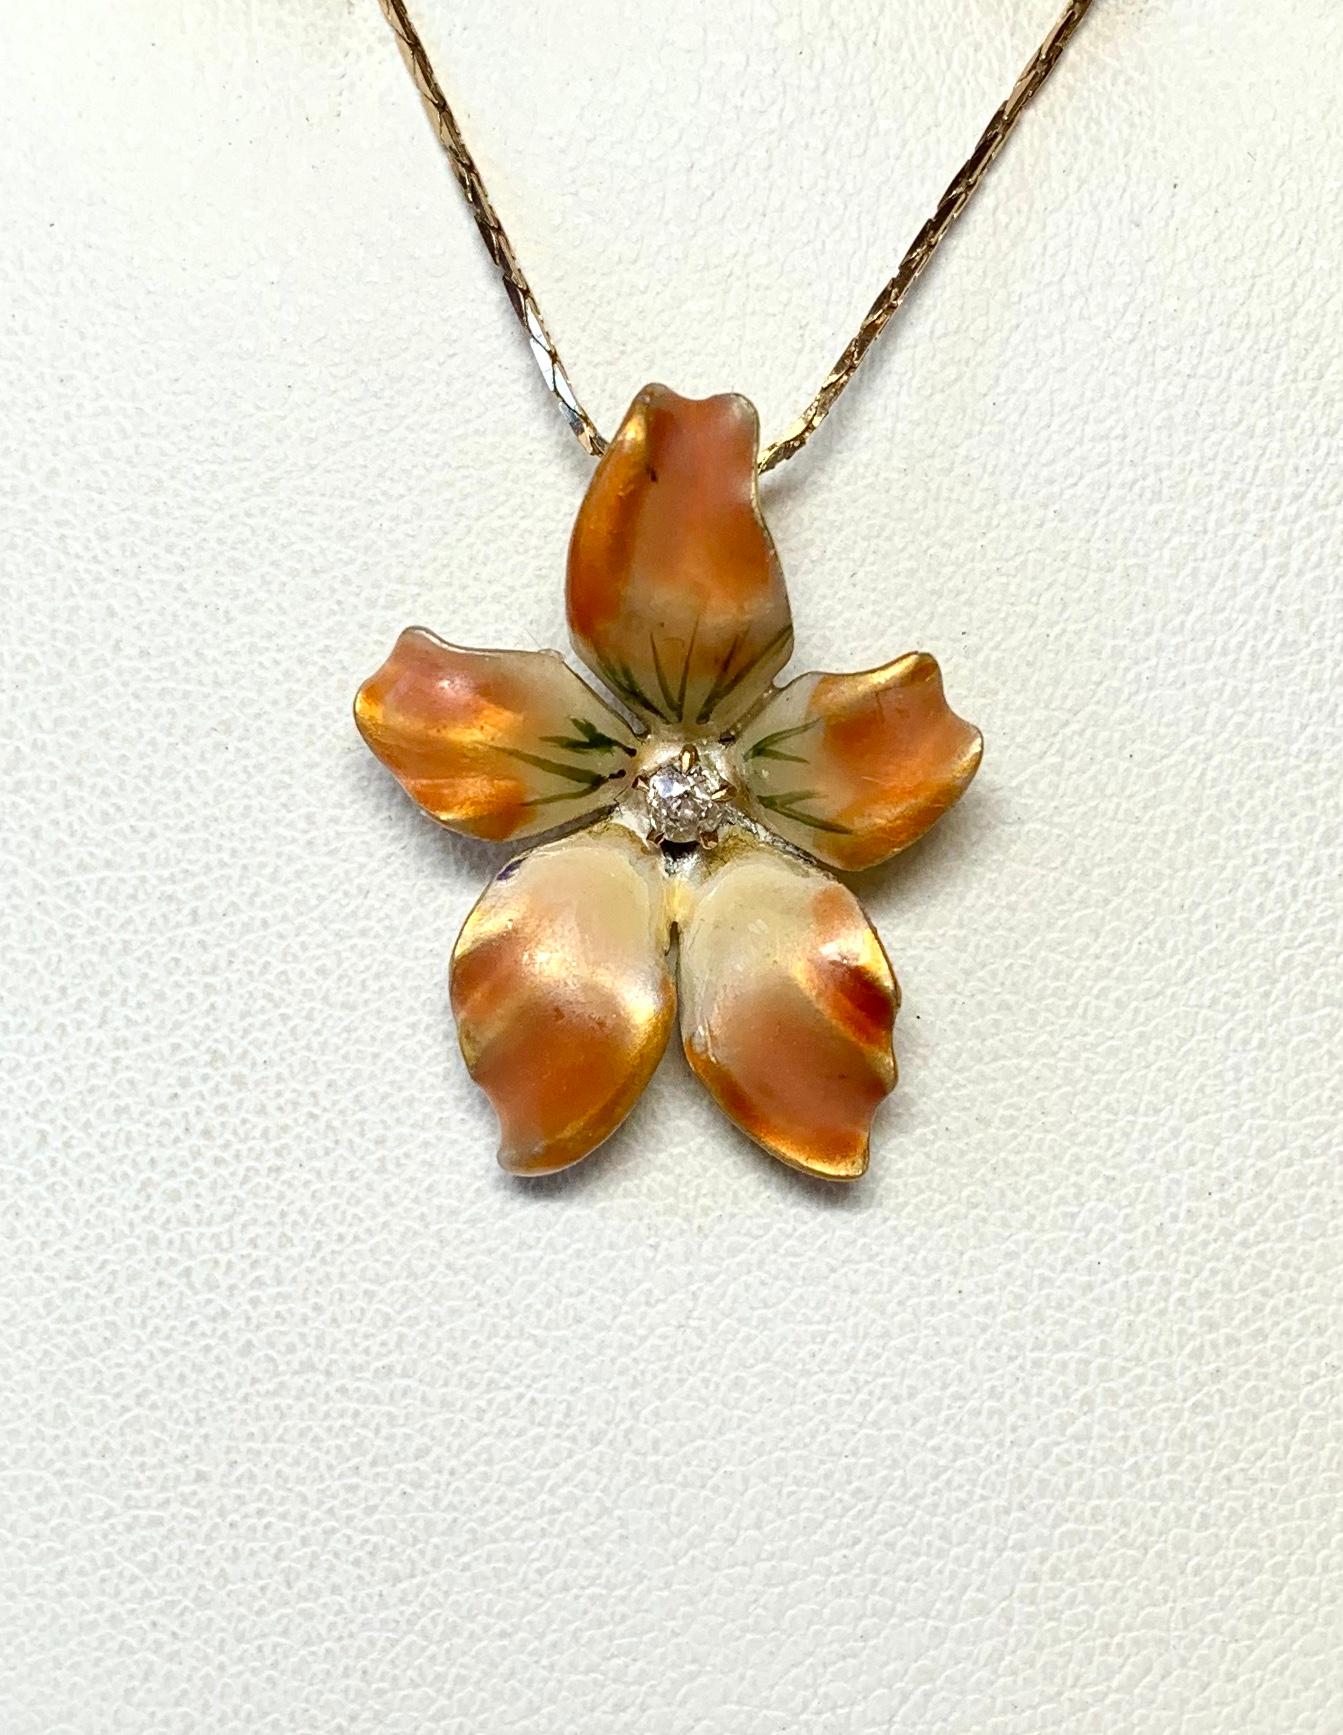 THIS IS A VICTORIAN - ART NOUVEAU LAVALIERE PENDANT IN THE FORM OF A FLOWER OR ORCHID - SO STUNNING WITH THE MOST SPECTACULAR MULTI-HUED ORANGE, CREAM AND YELLOW DETAILED ENAMEL OF THE HIGHEST QUALITY SET WITH A RADIANT ANTIQUE OLD MINE CUT DIAMOND